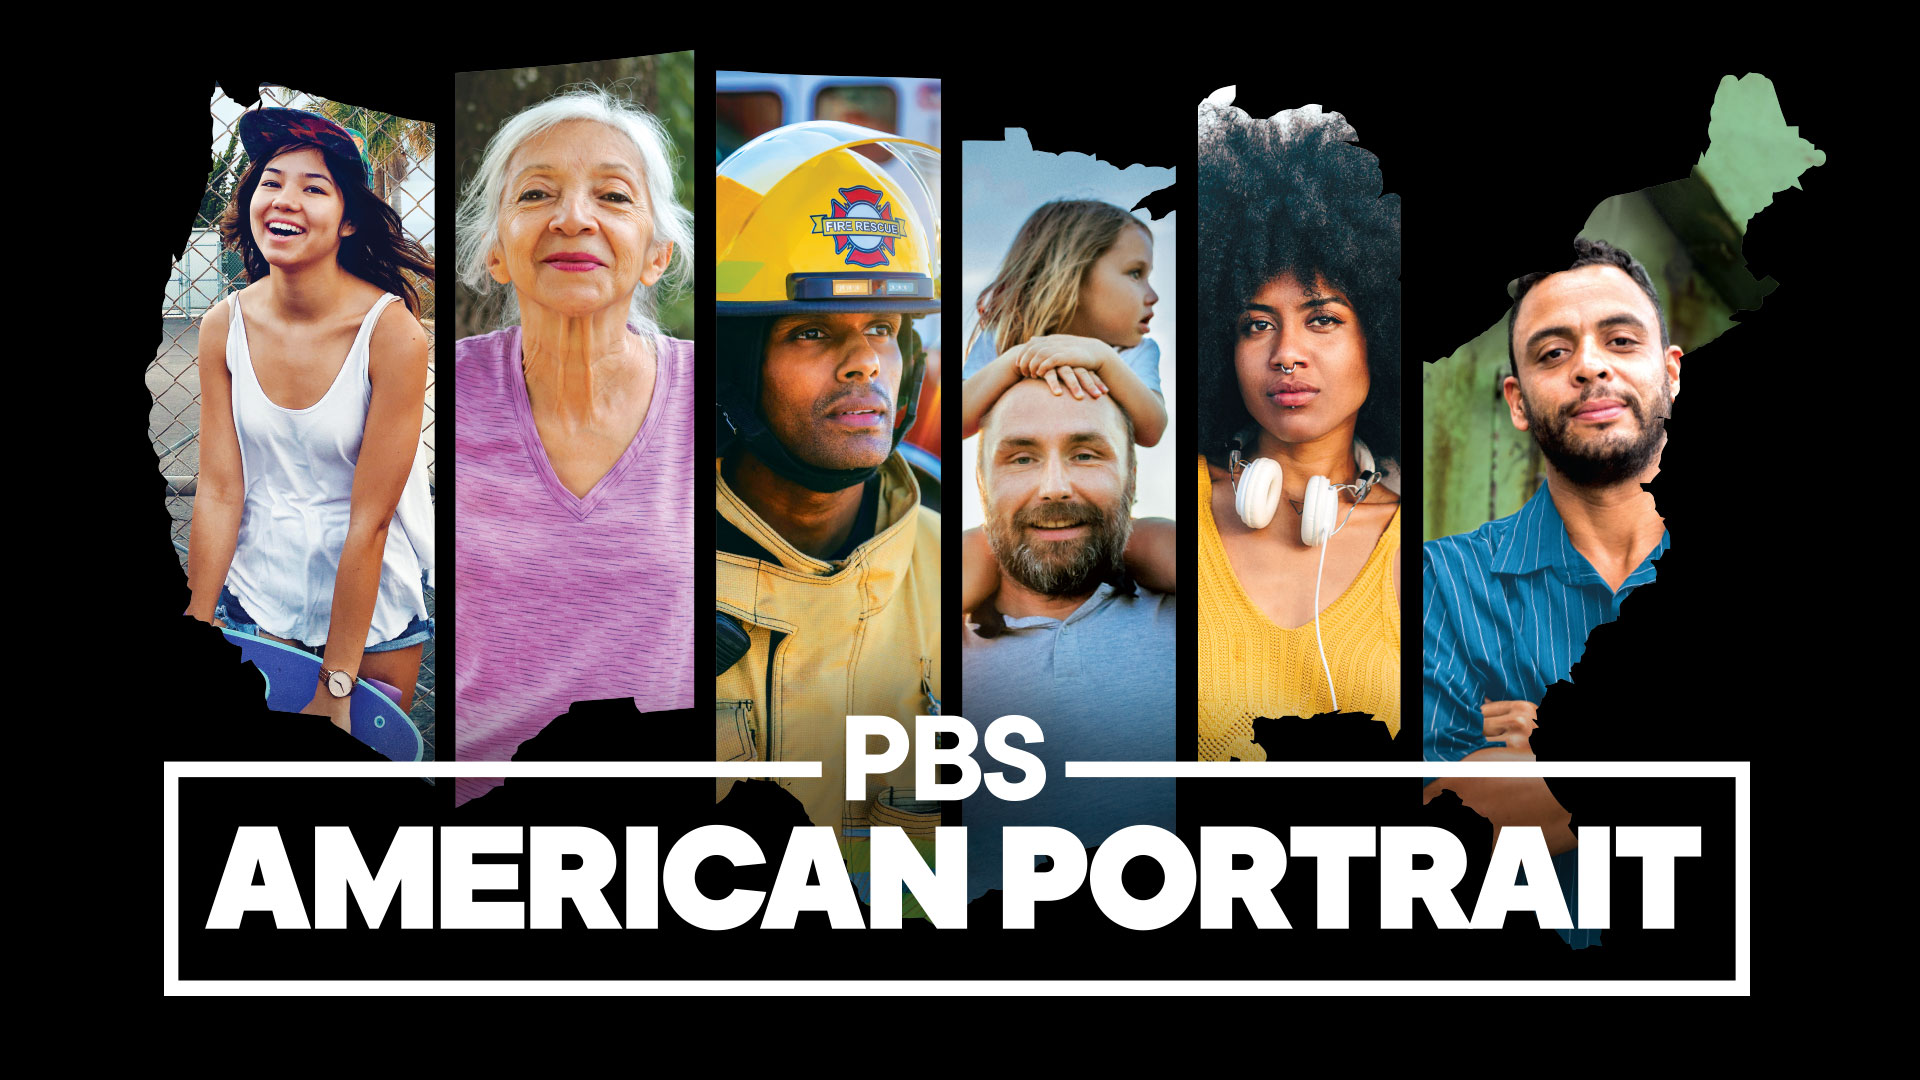 PBS American Portrait is a digital-first, national storytelling project about what it really means to be an American today.